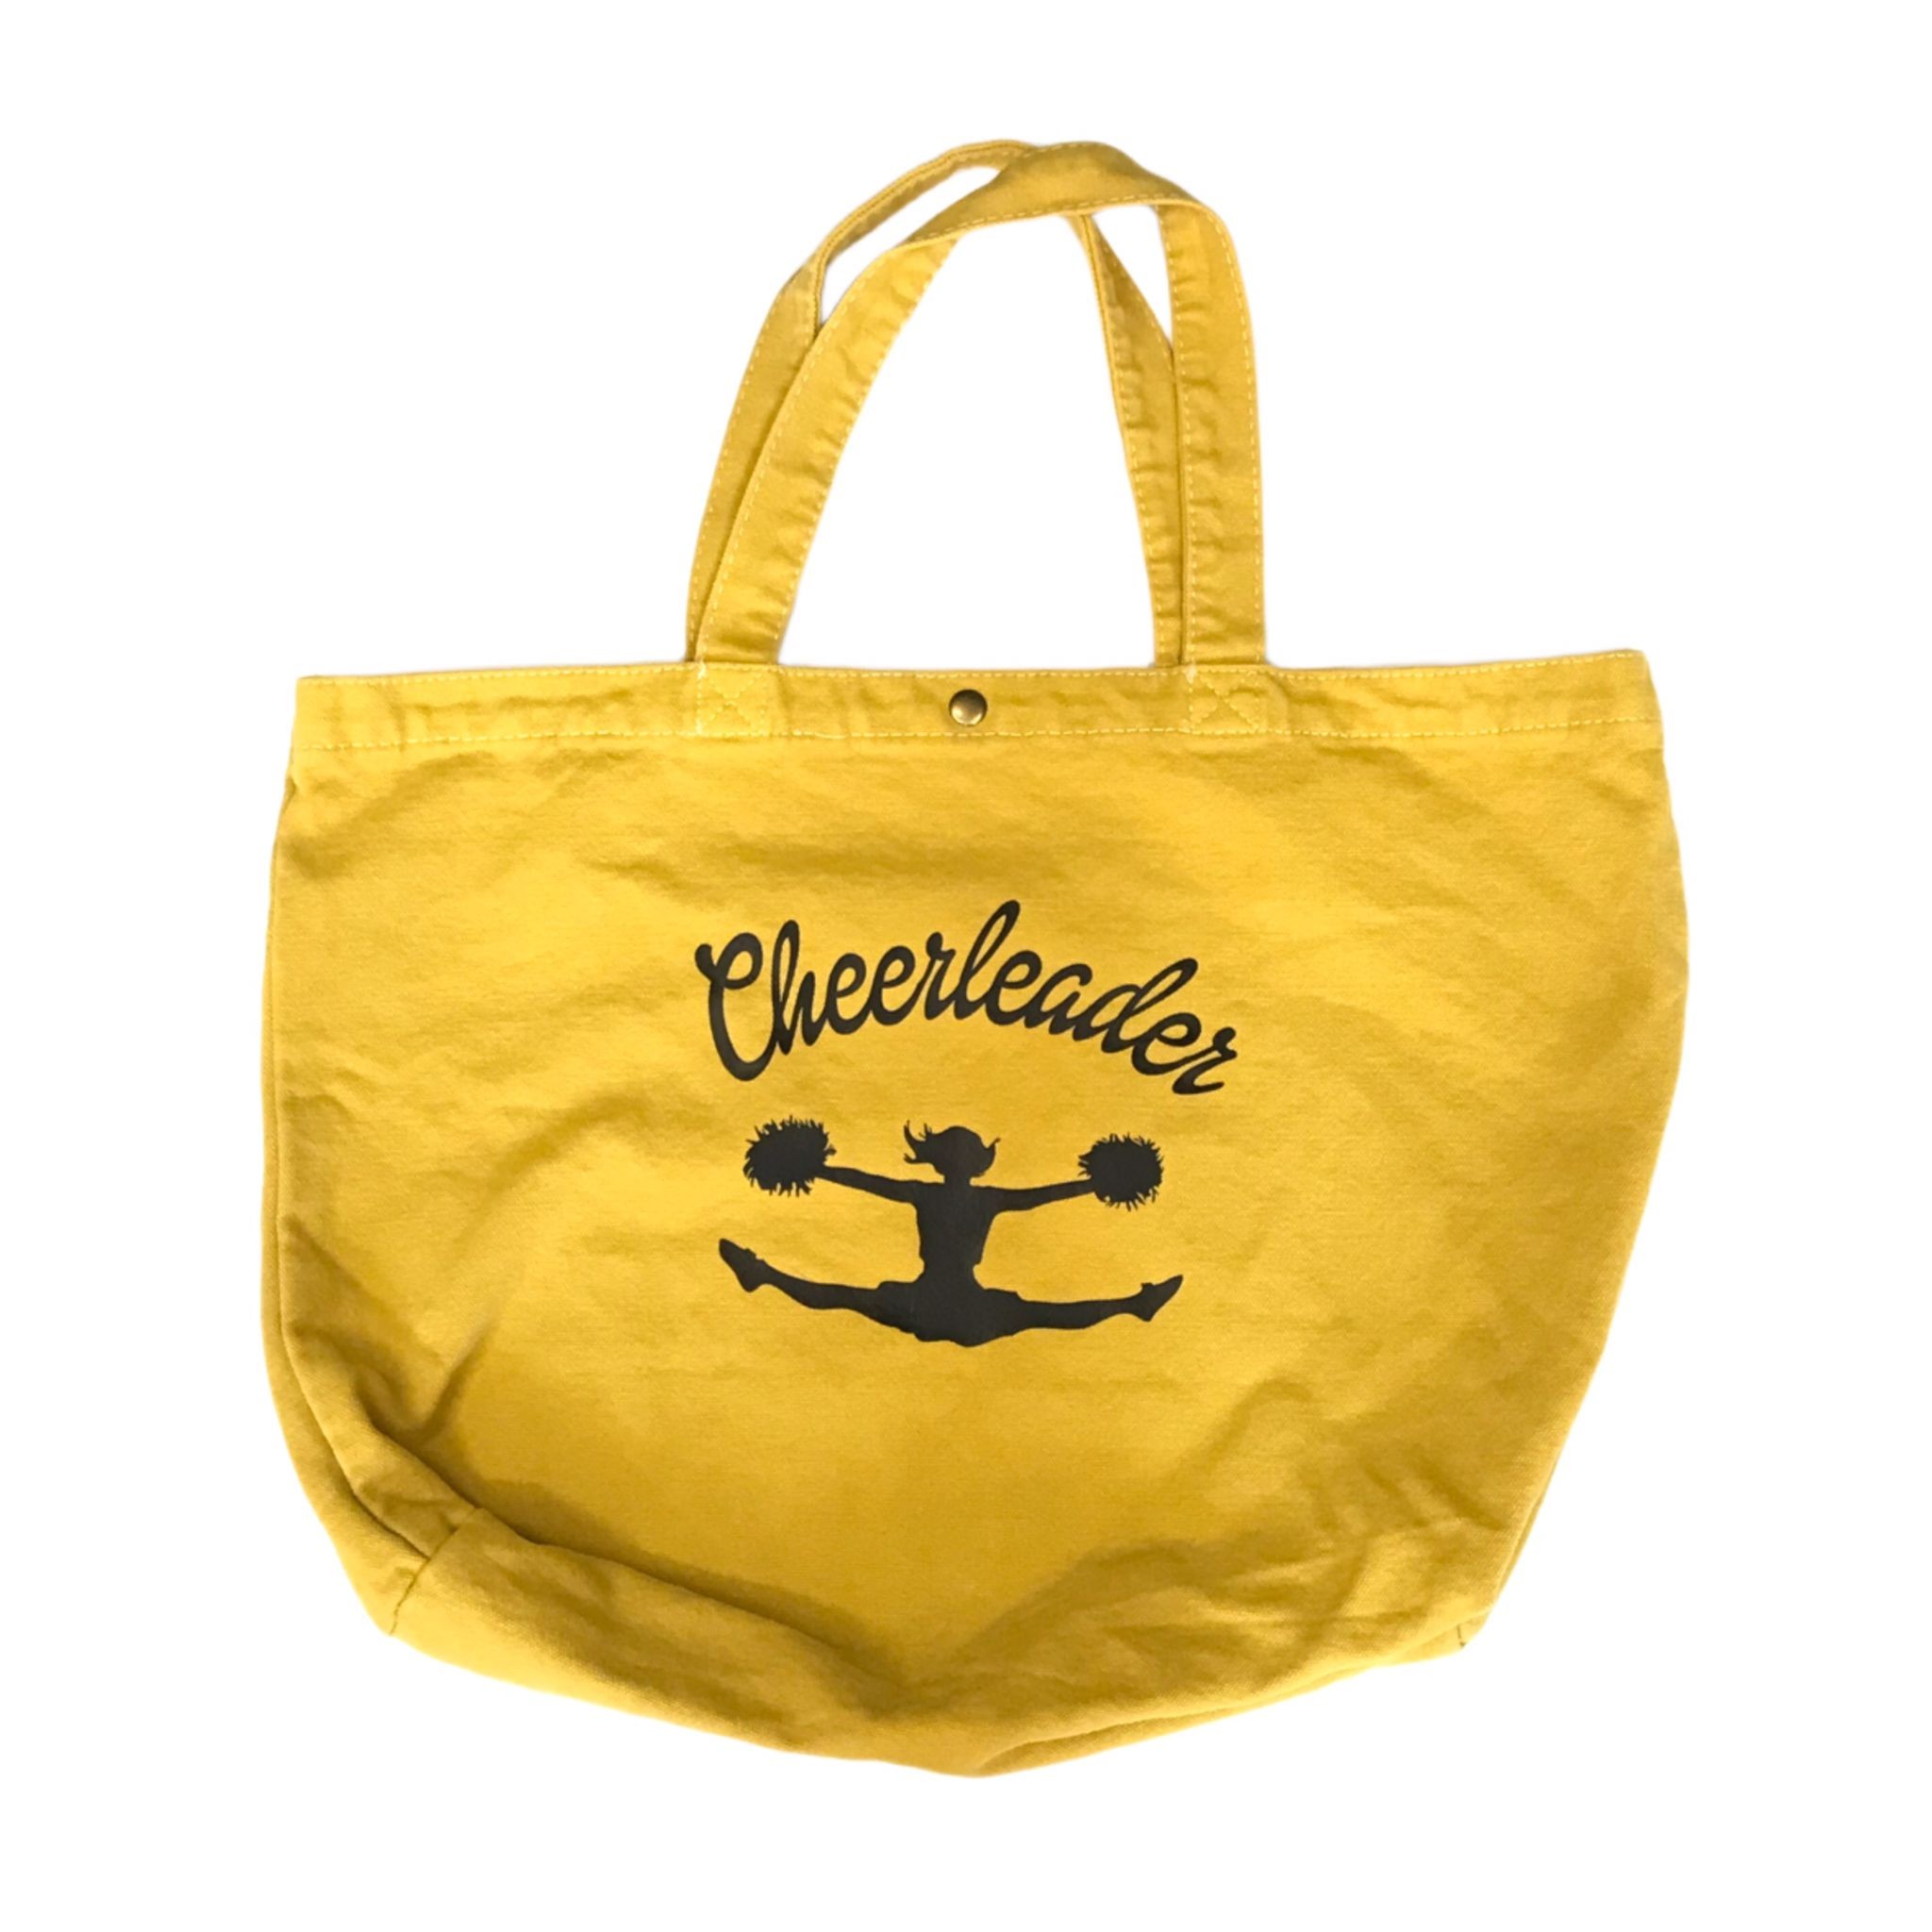 Bag with Cheerleader printing - end of stock